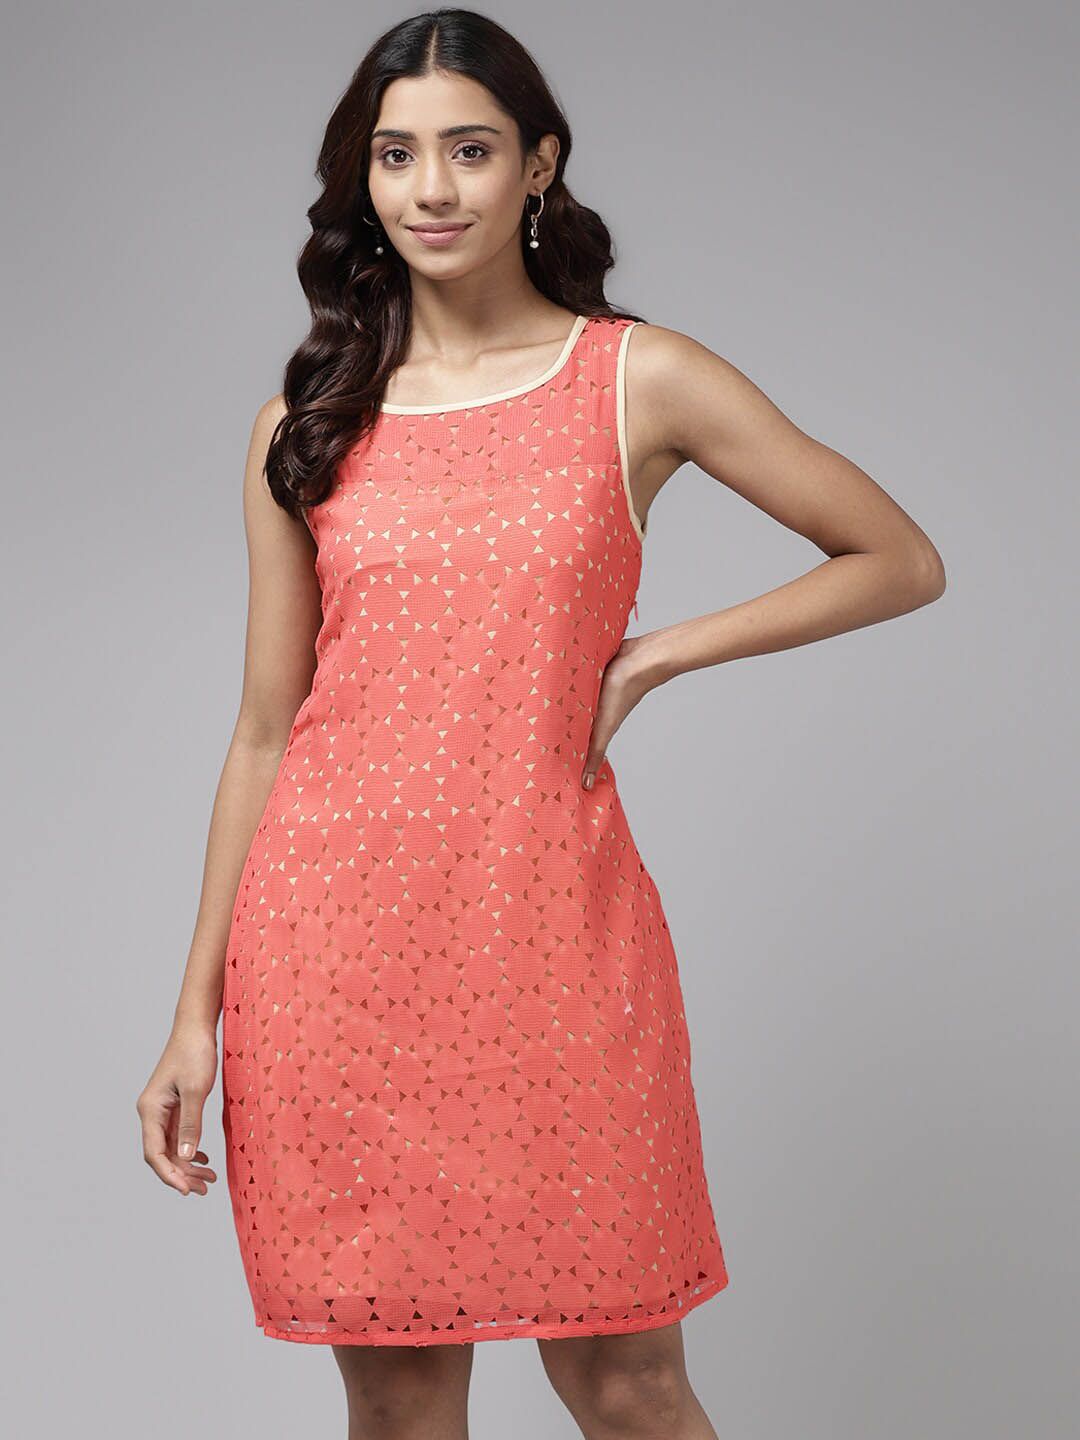 BAESD Self Design Cut-Outs Detail A-Line Dress Price in India